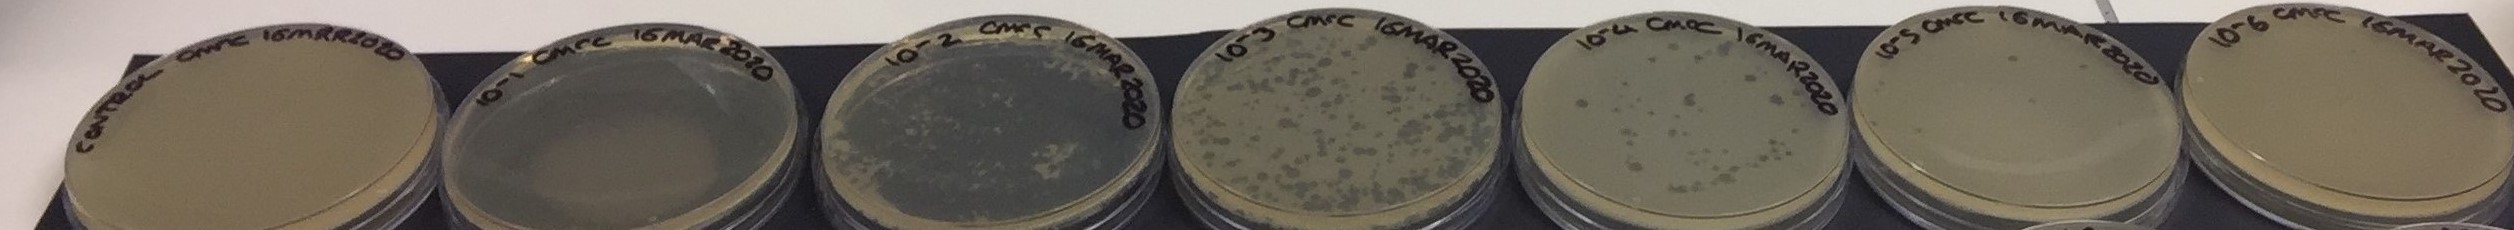 Example of a Streptomyces bacteriophage plaque assay. A plaque assay was performed using decimal serial dilutions of ΦC31 and a pglW- strain of S. coelicolor.